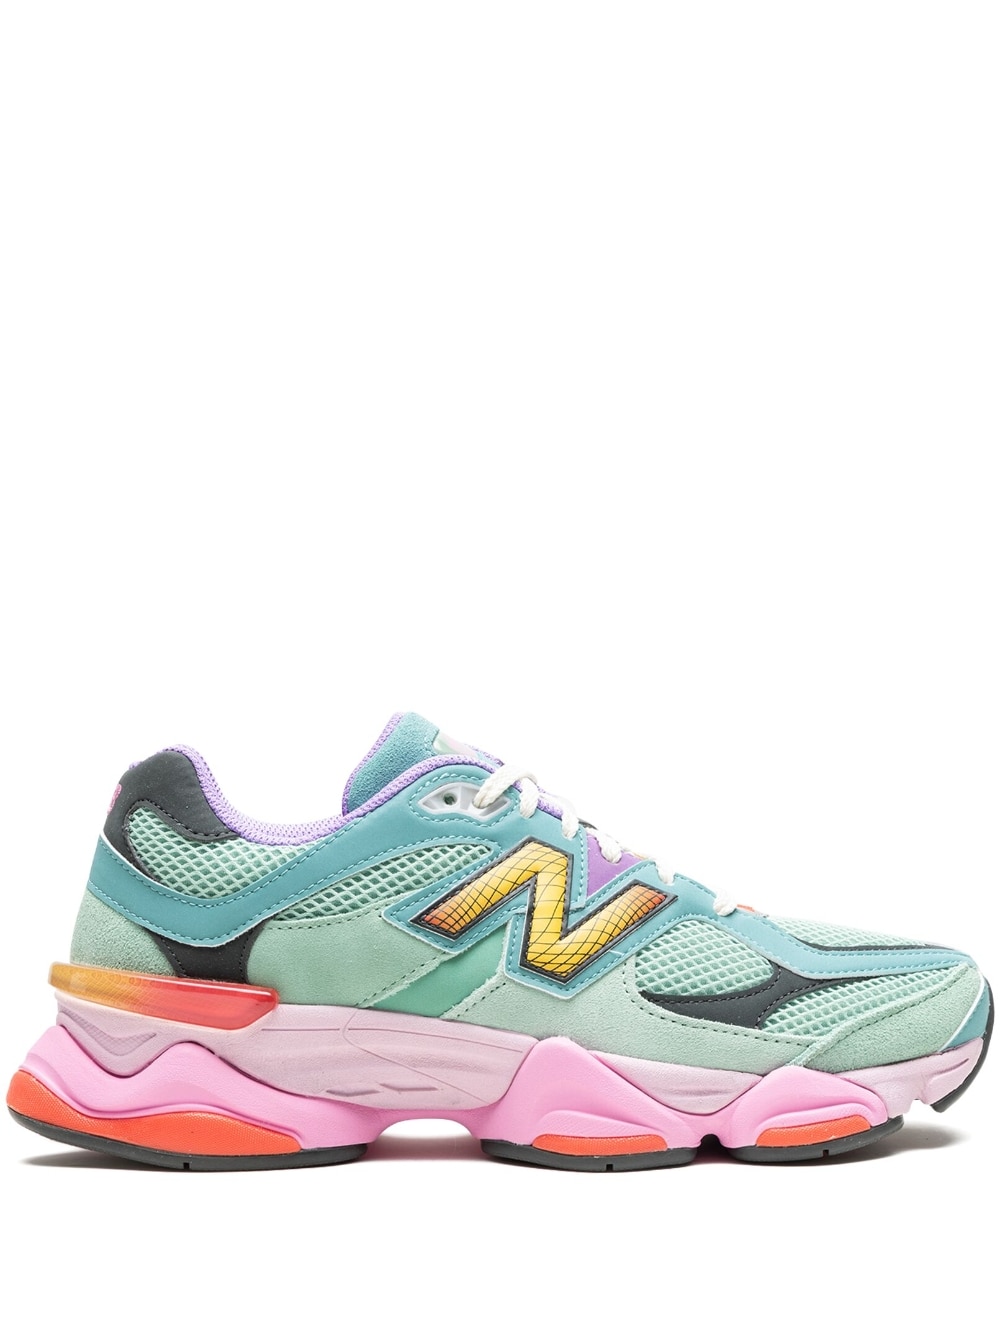 New Balance 9060 "Sage Leaf/Neo Flame" sneakers - Green